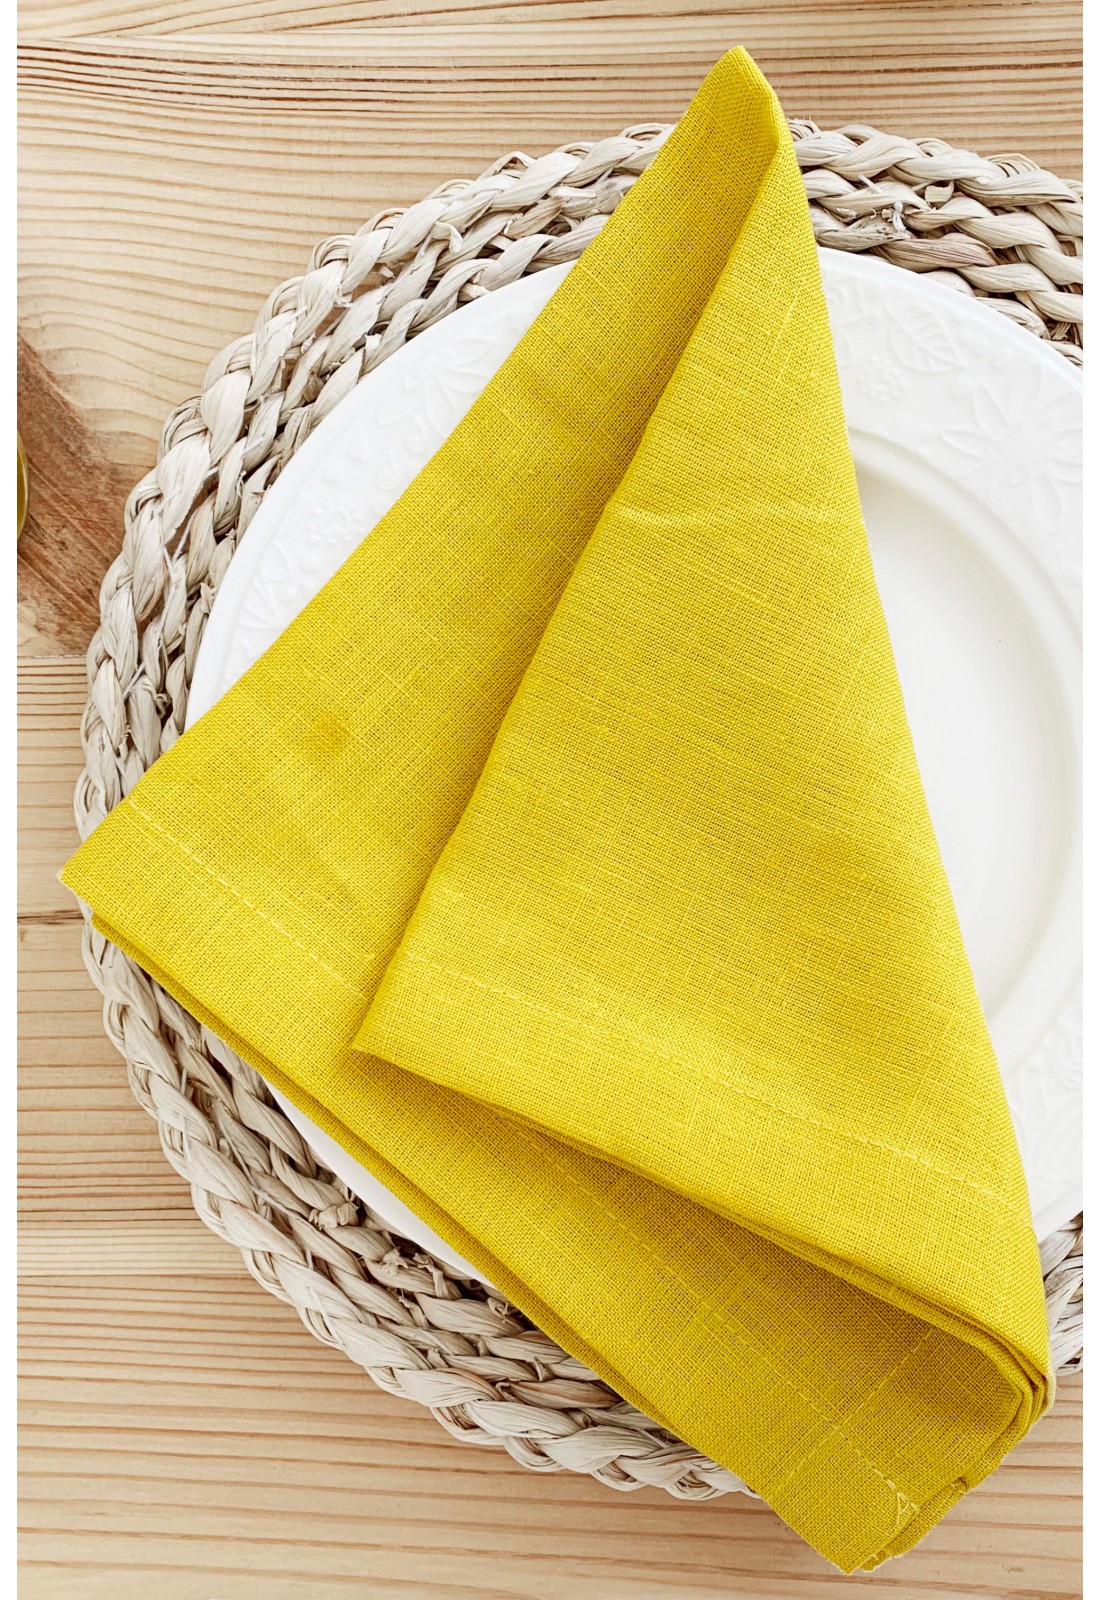 https://www.touchablelinen.com/image/cache/catalog/products/19/Linen-napkins-in-yellow-7-1100x1600.jpg